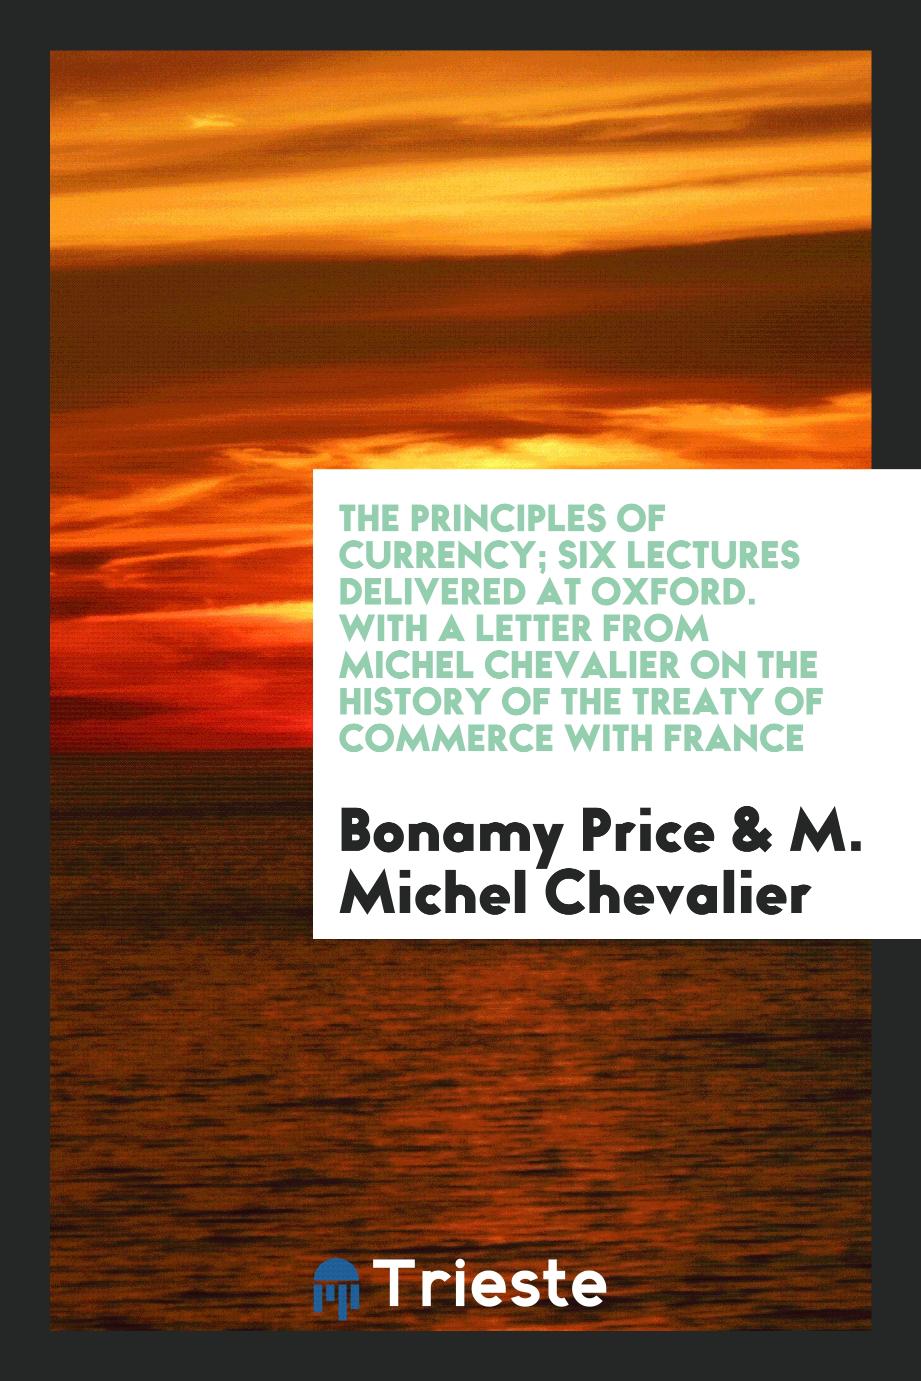 The principles of currency; six lectures delivered at Oxford. With a letter from Michel Chevalier on the history of the treaty of commerce with France